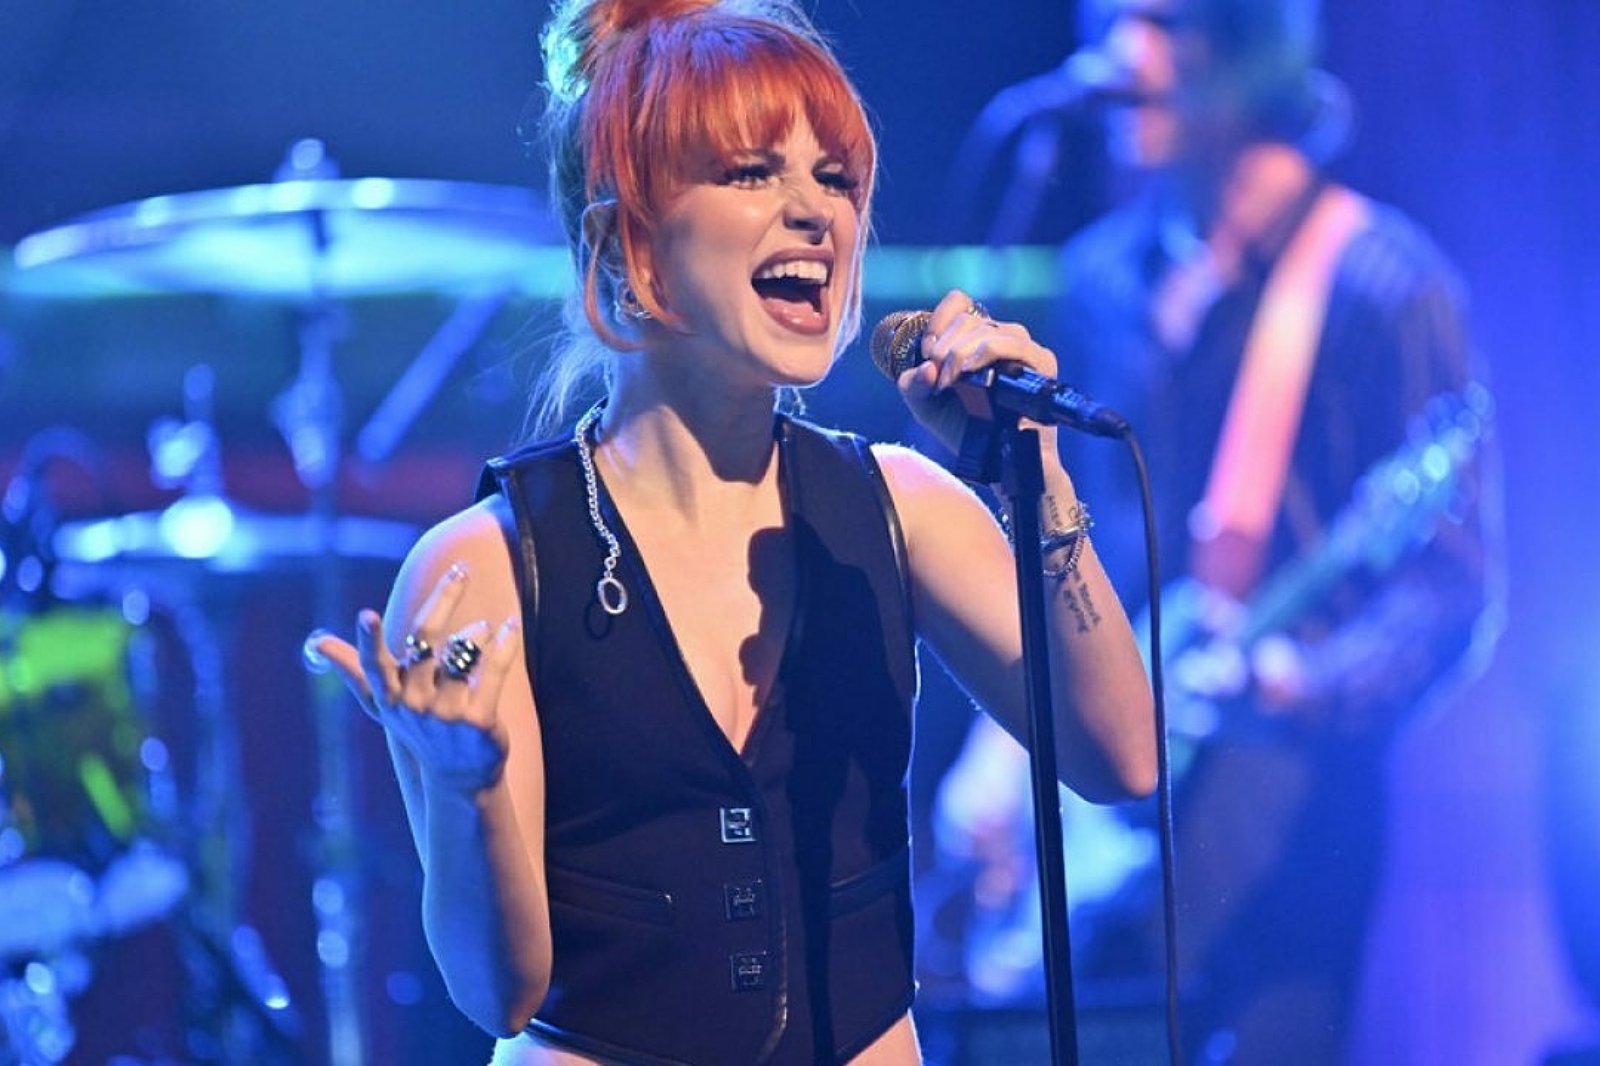 Watch Paramore perform 'This Is Why' on The Tonight Show Starring Jimmy Fallon